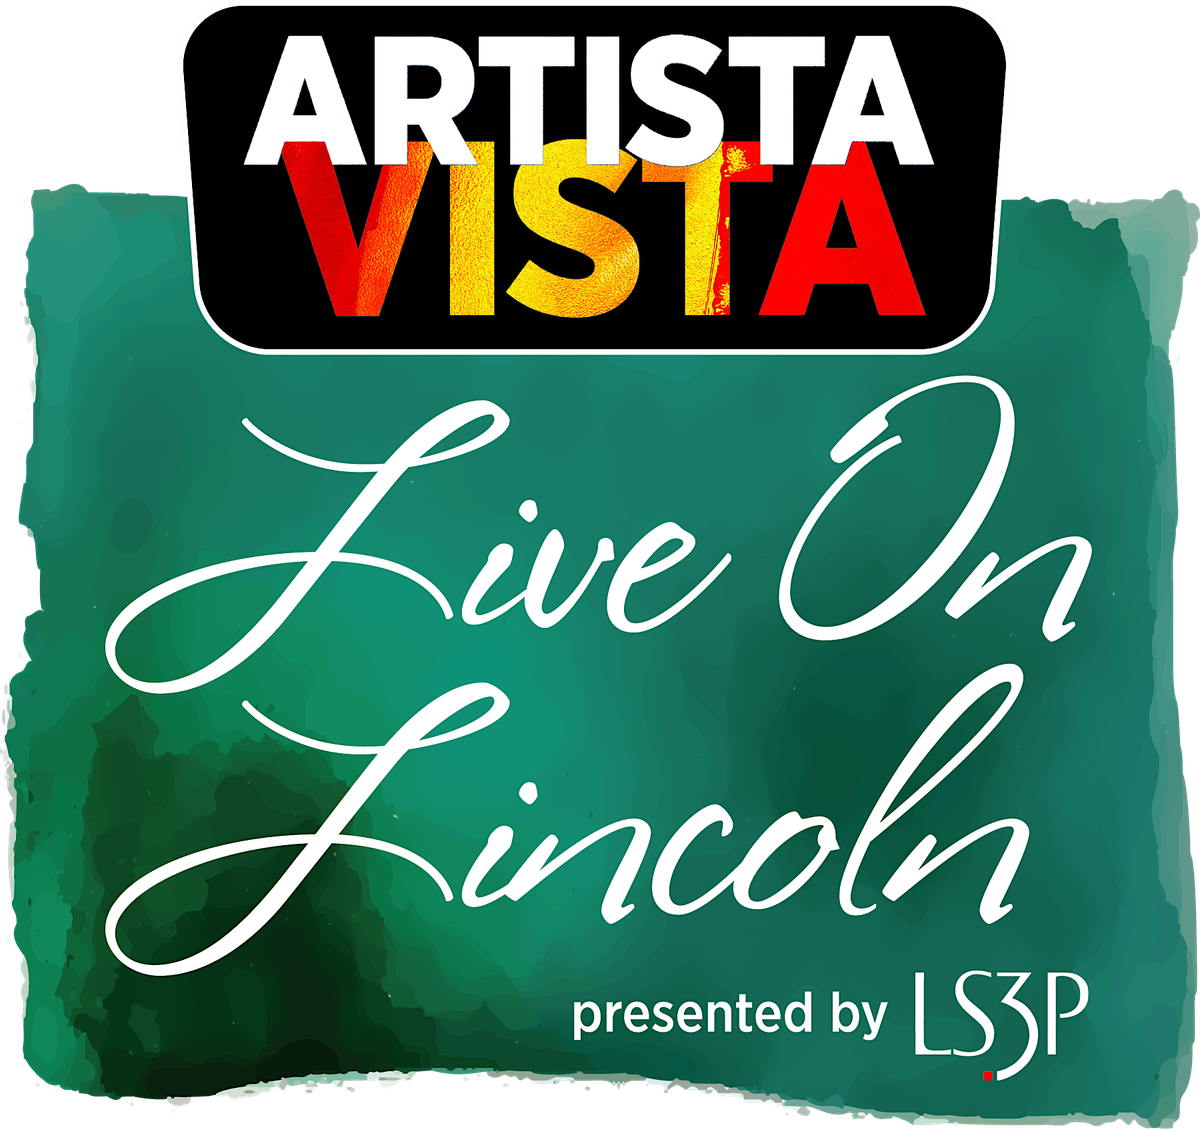 Volunteer at Artista Vista's Live on Lincoln pres. by LS3P!